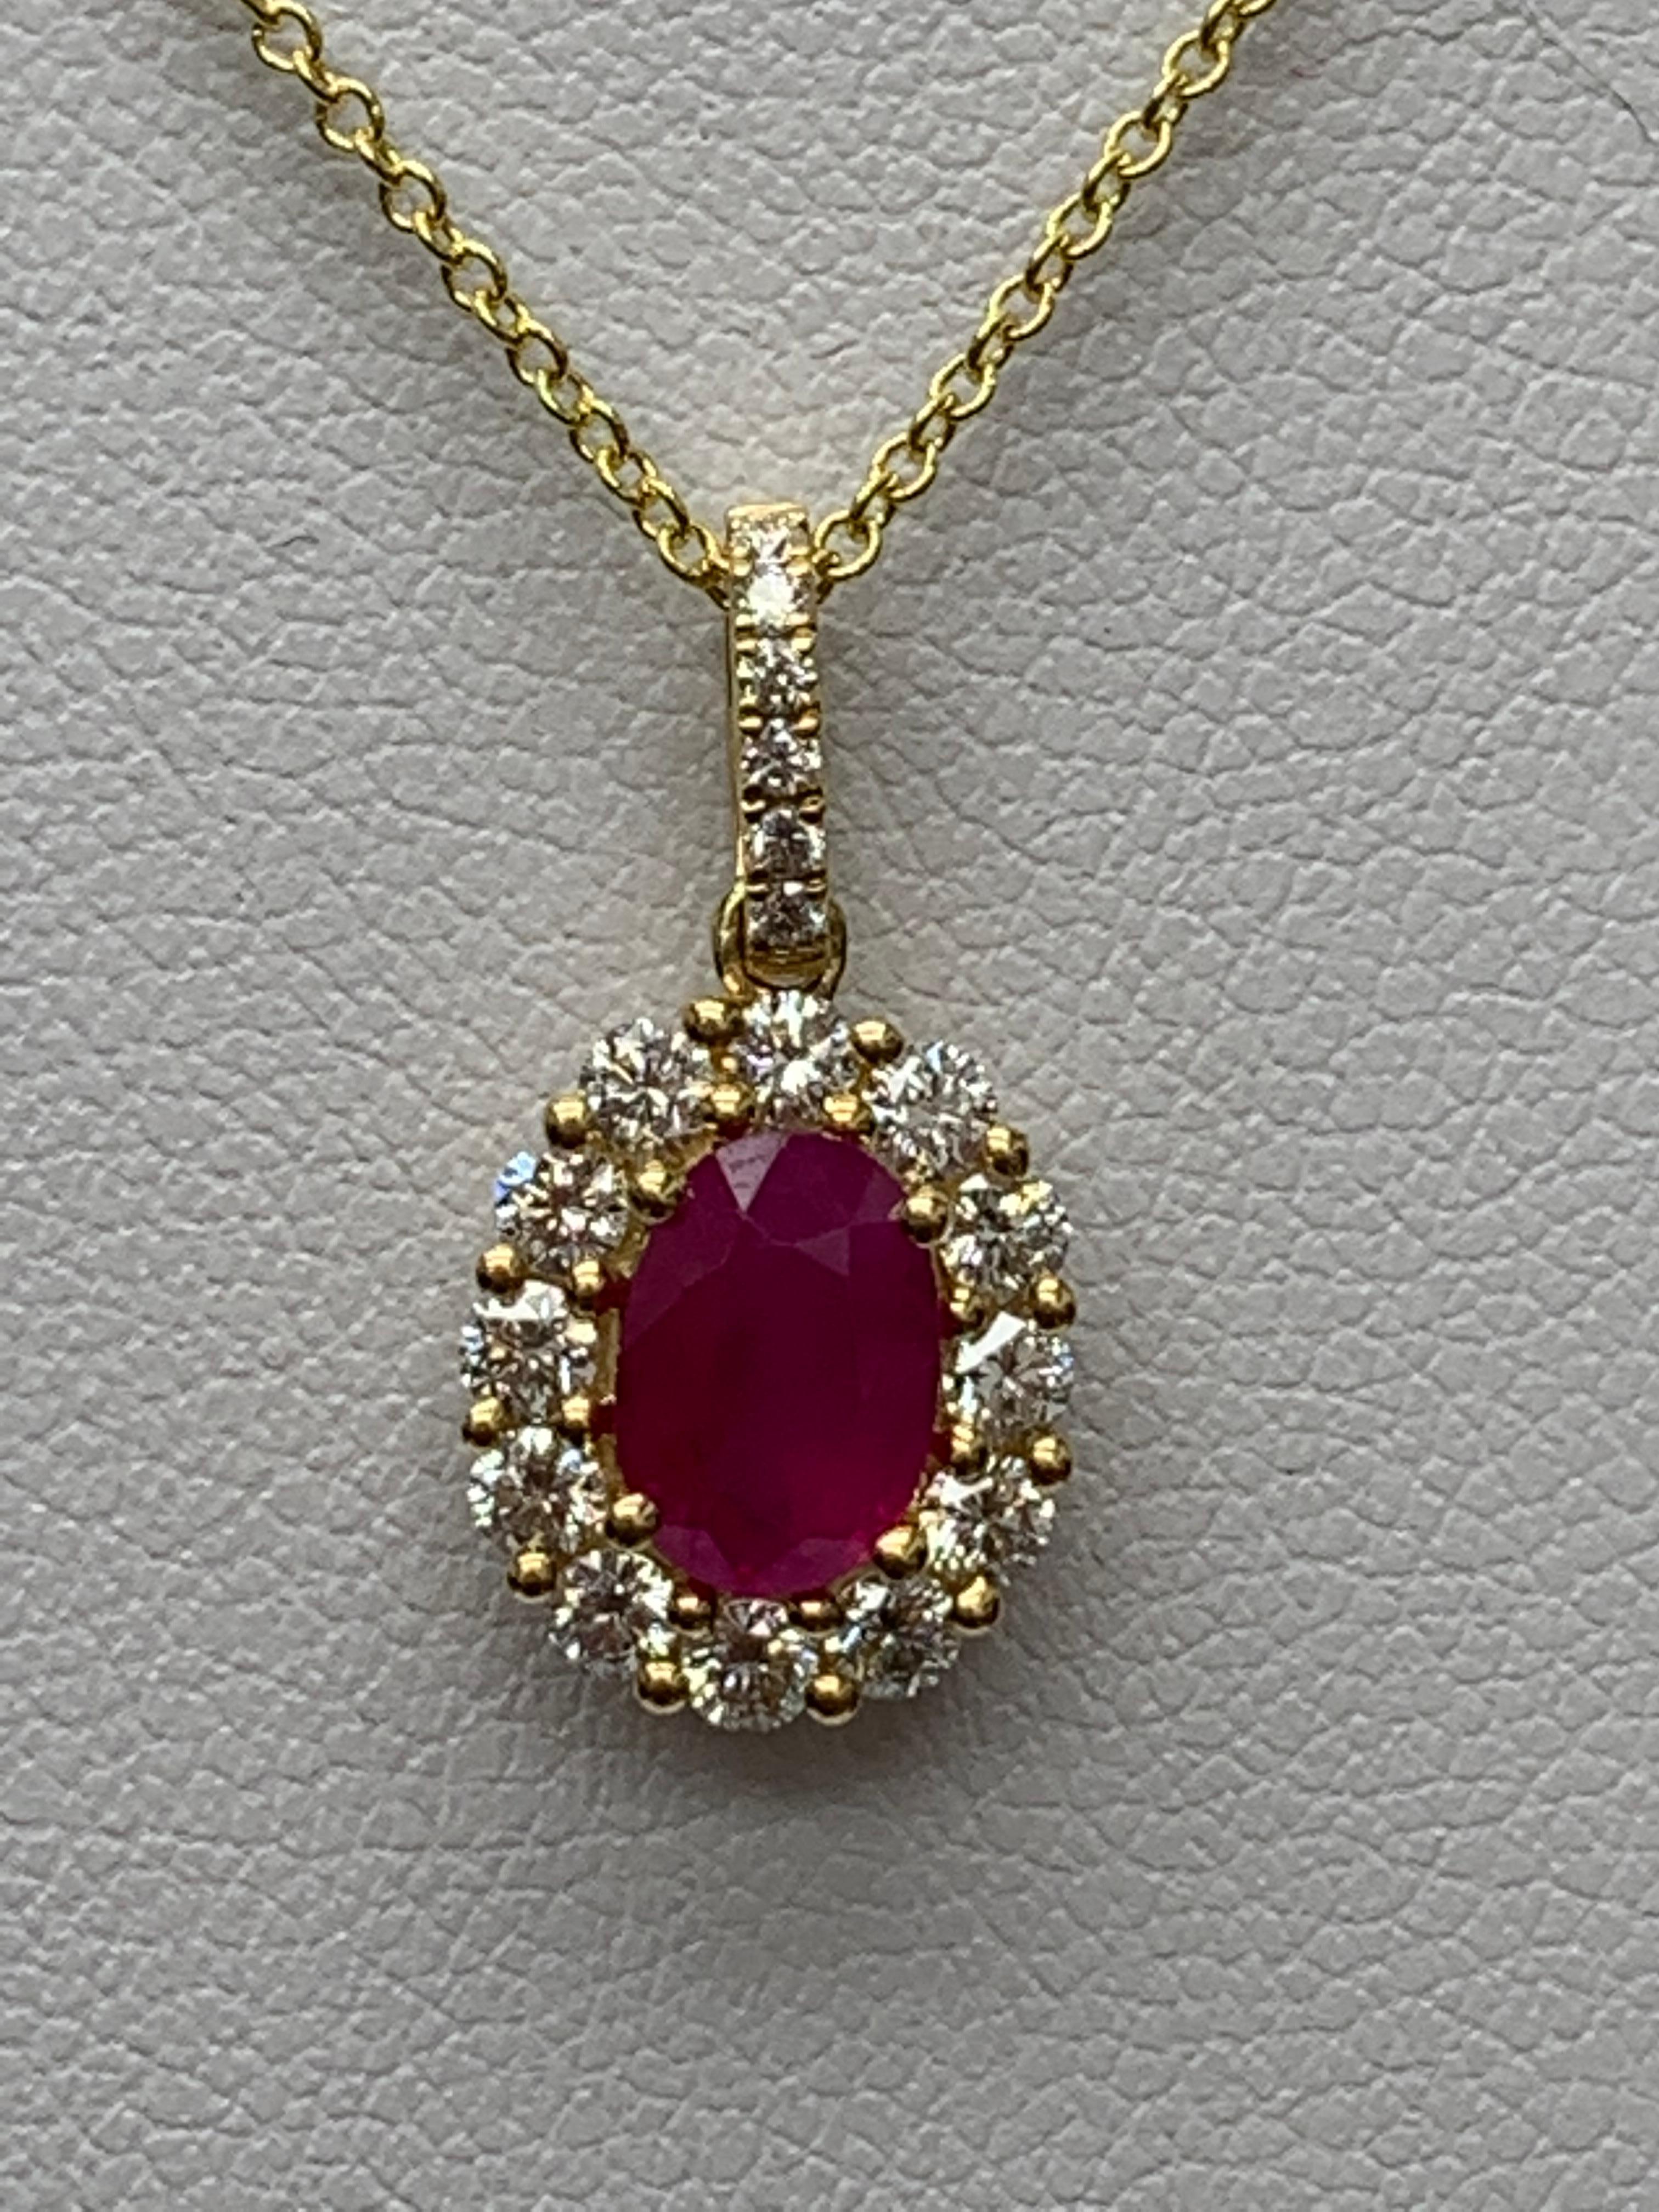 A simple pendant necklace showcasing a vibrant 1-carat oval cut red ruby, surrounded by 
0.43 carats of 18 accent round diamonds. Made in 18 karats white gold.

Style is available in different price ranges. Prices are based on your selection of the